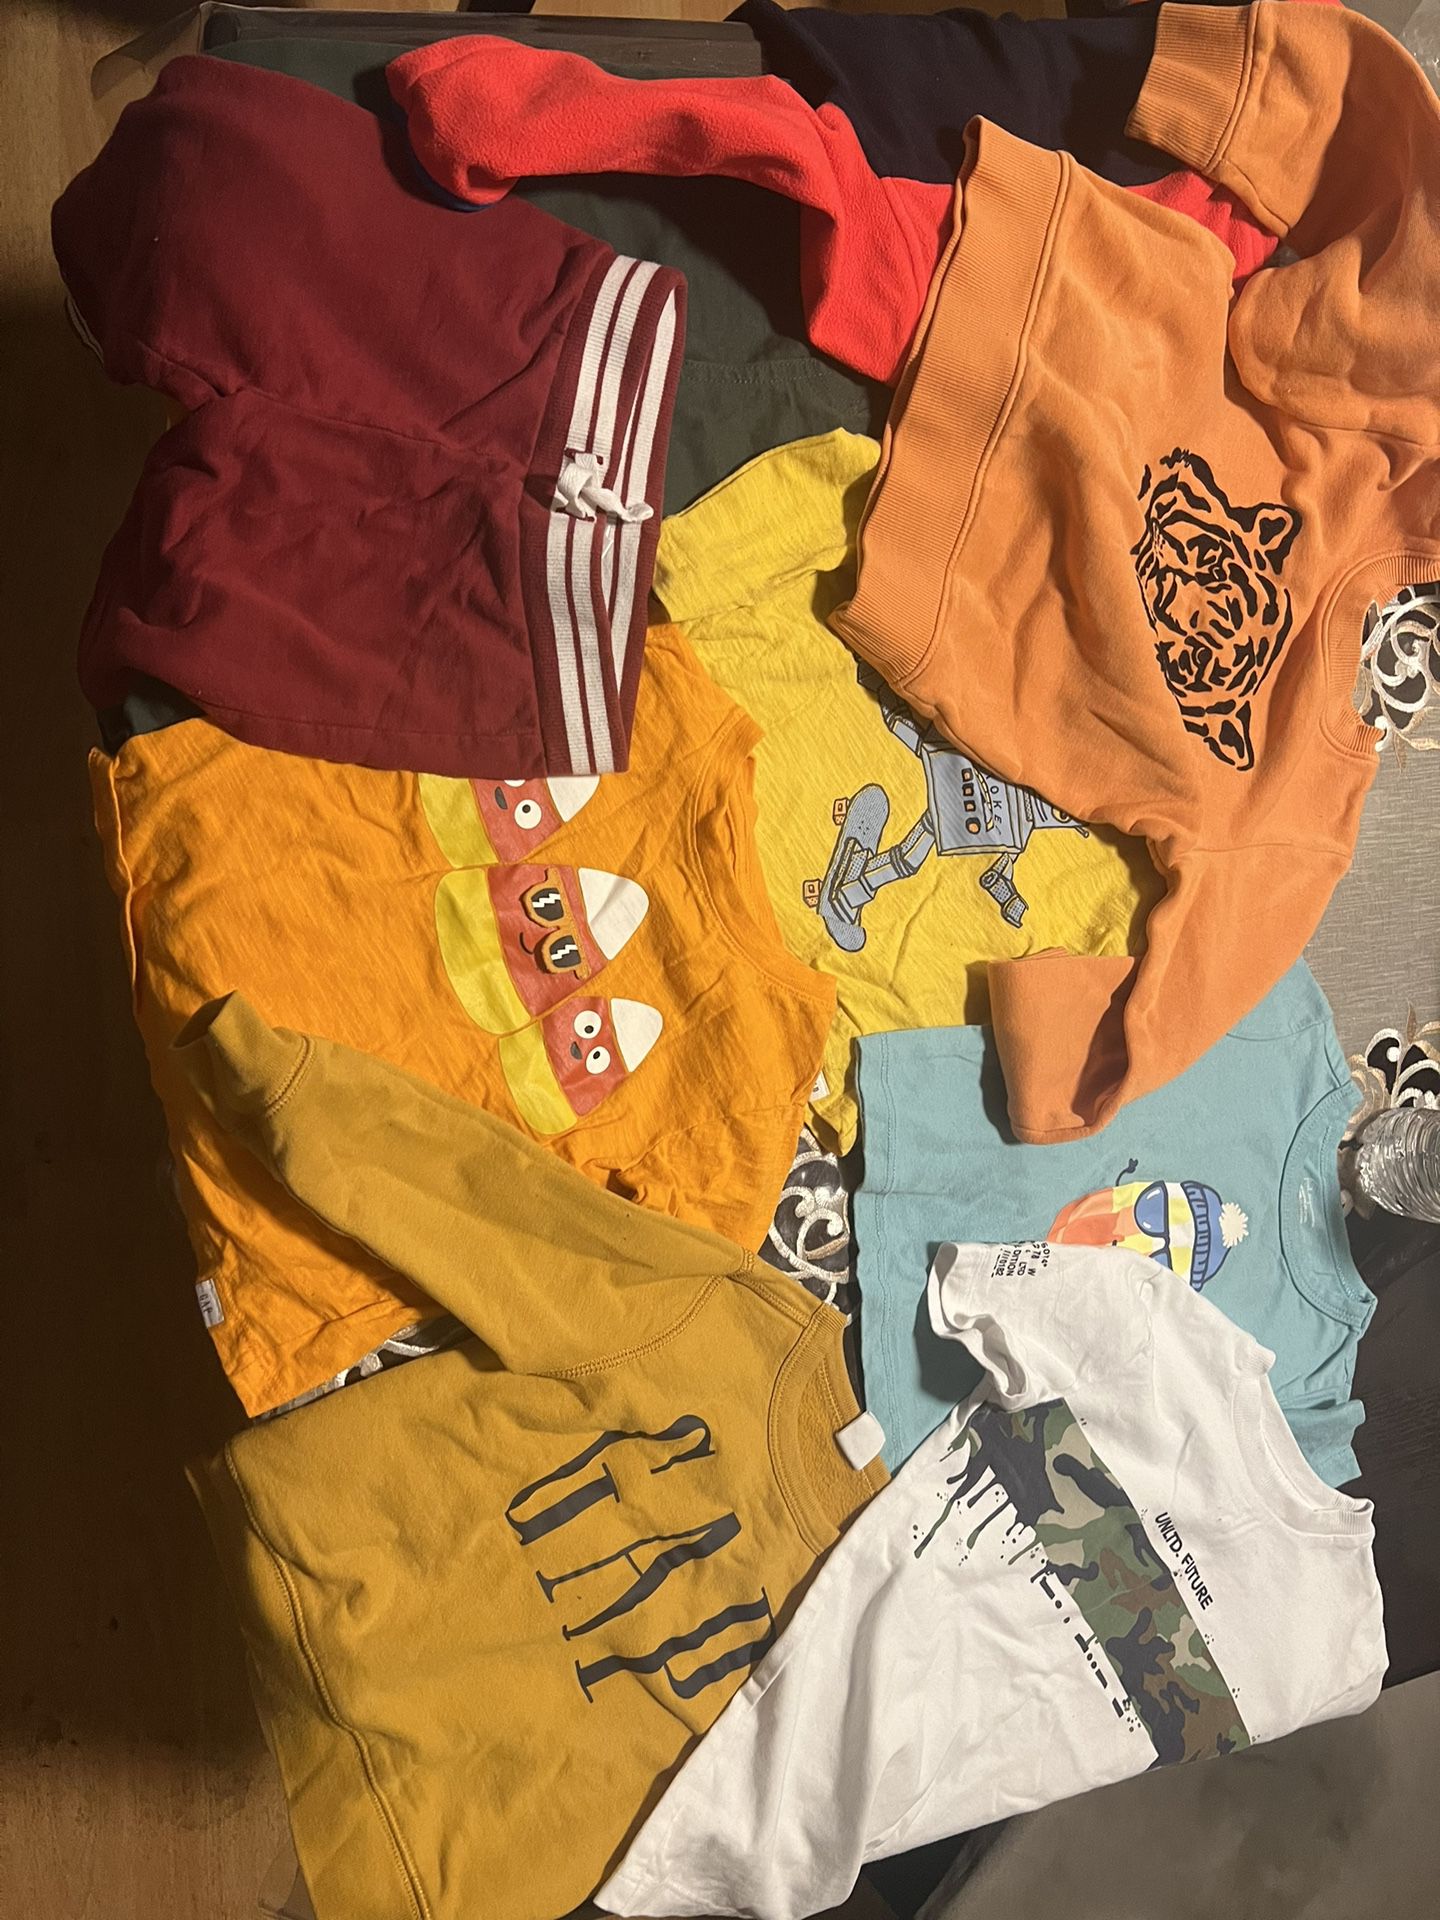 All Clothes $10